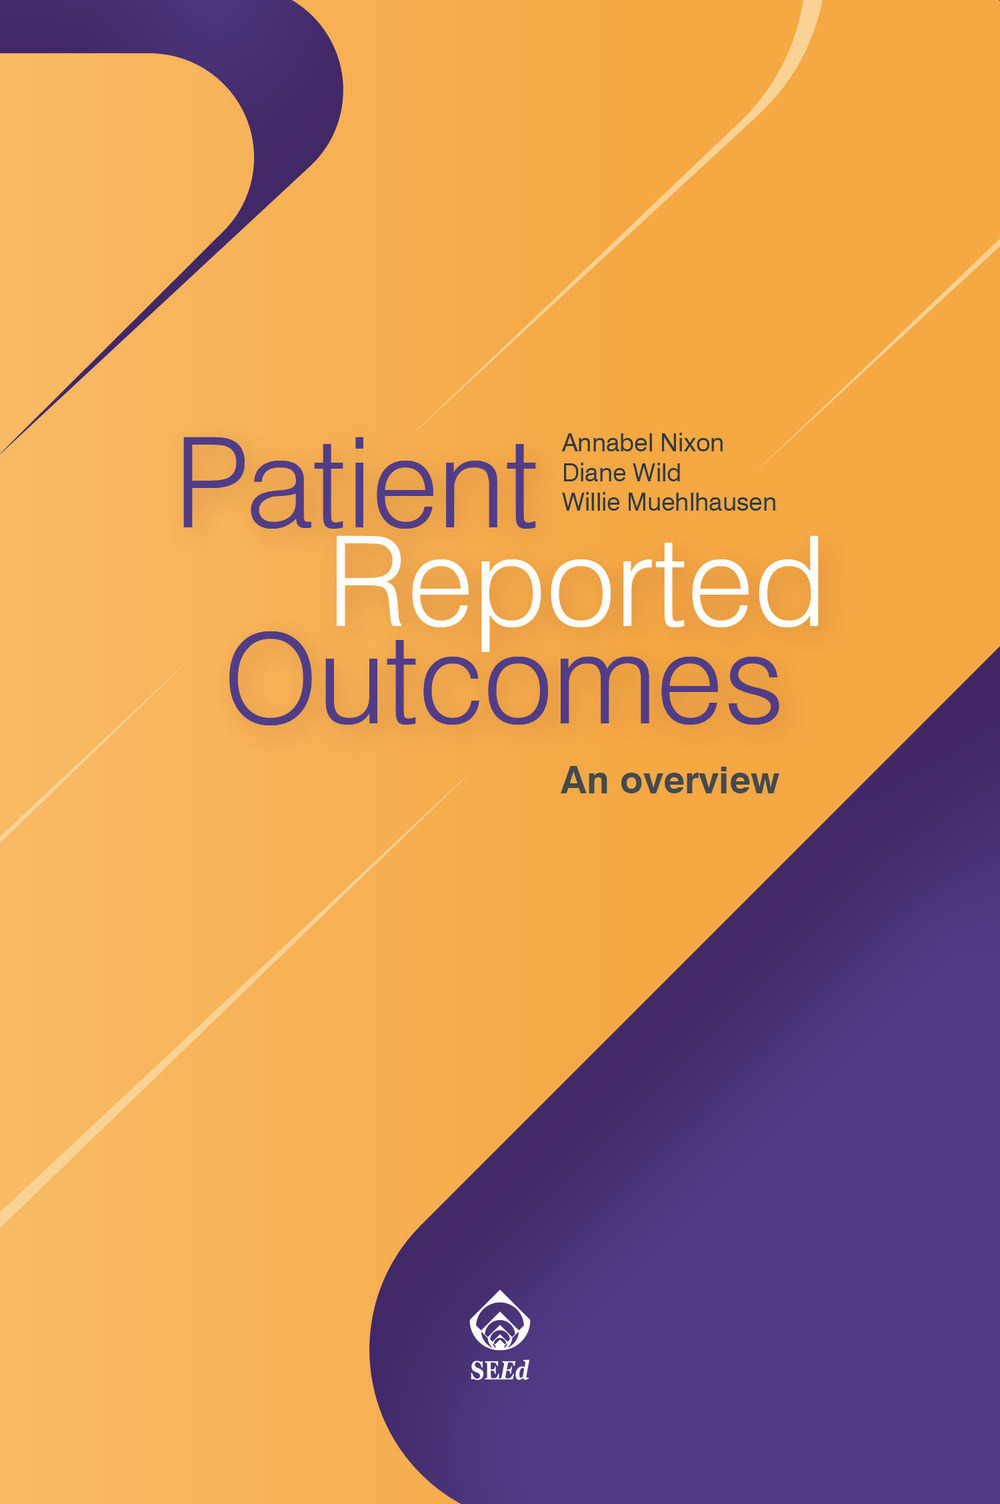 Patient reported outcomes. An overview